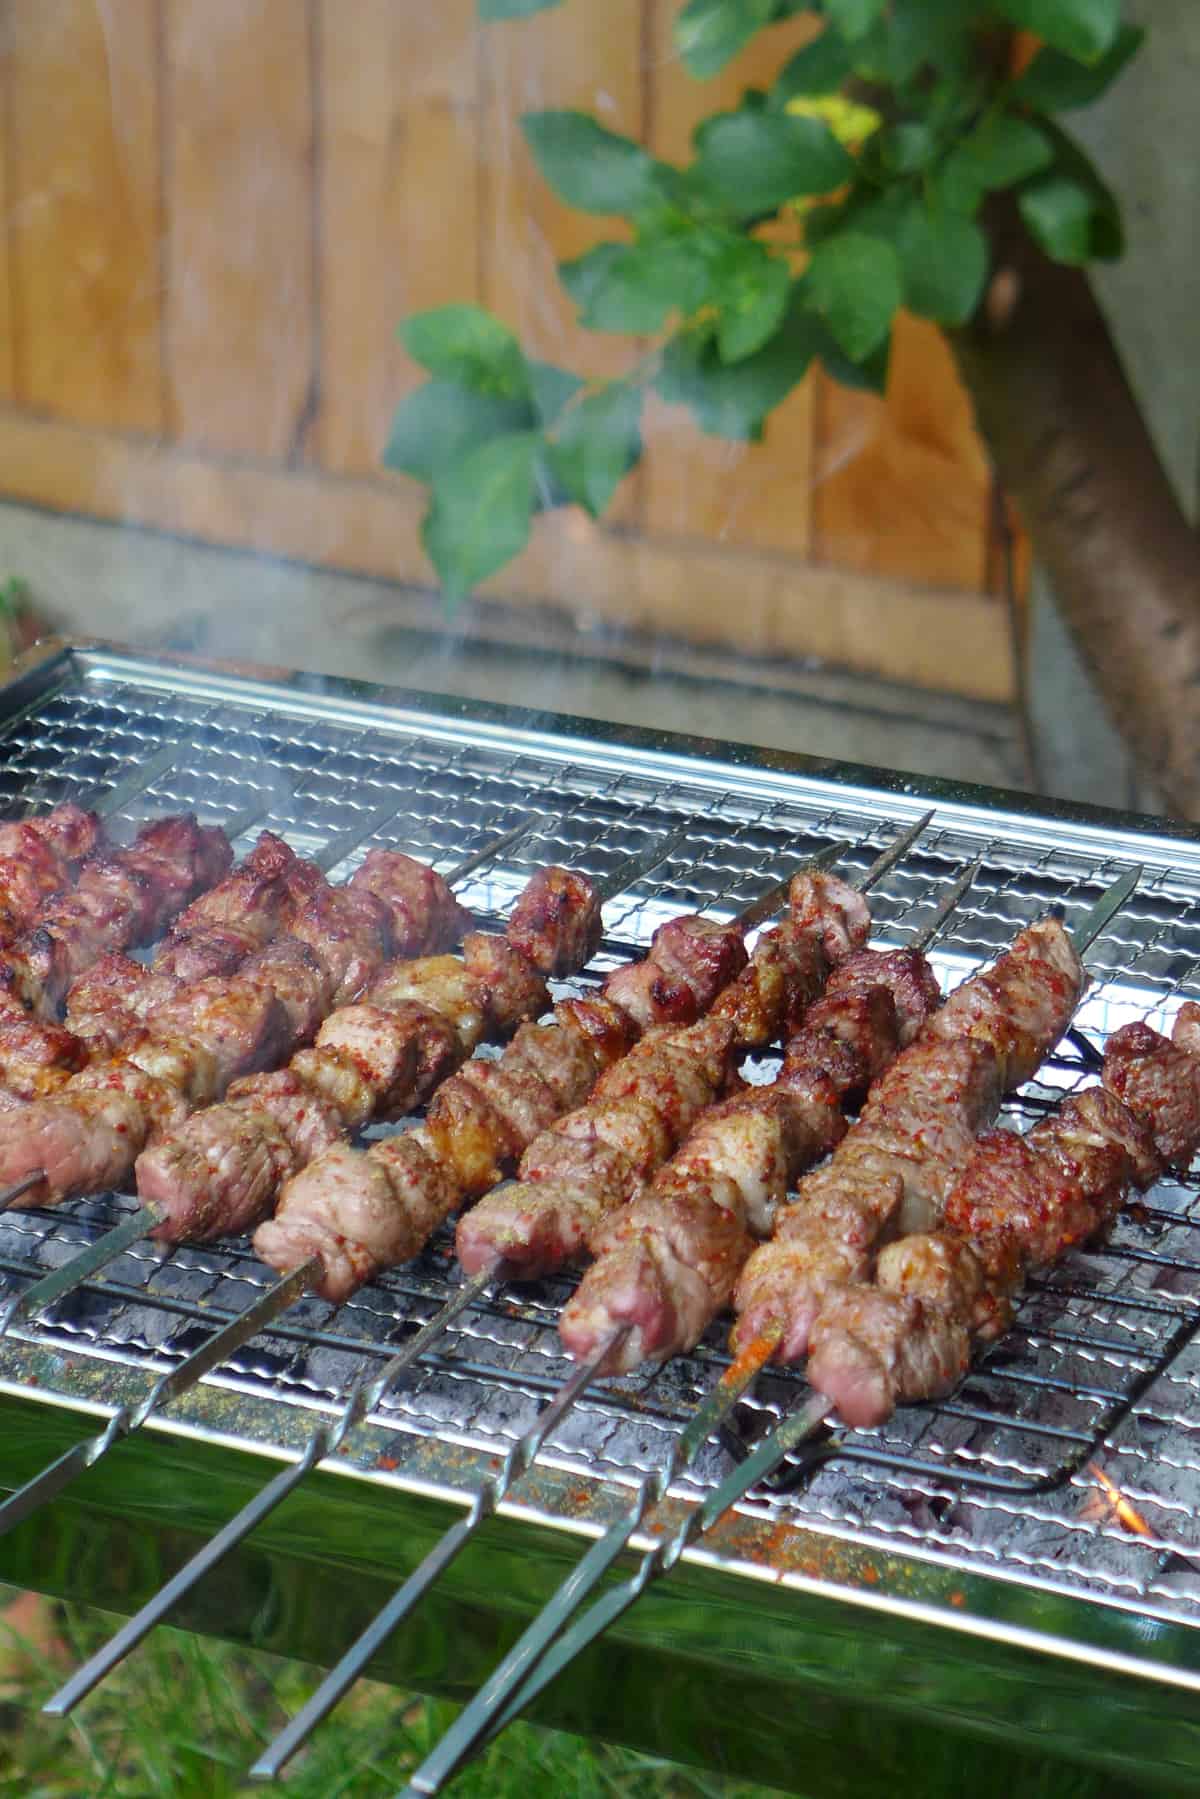 Lamb skewers on a charcoal grill